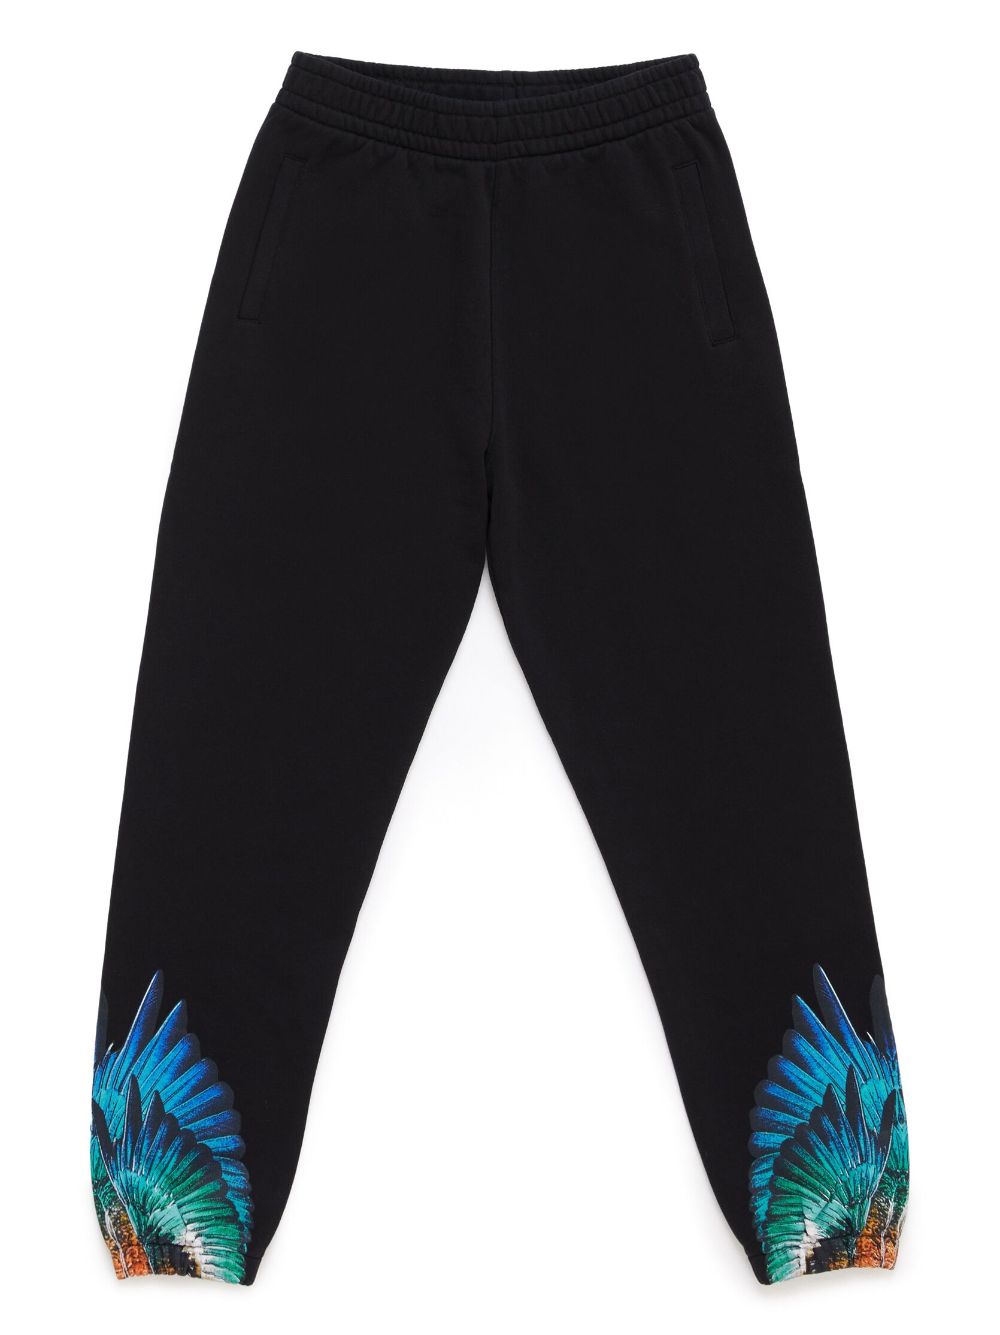 Black sports trousers with blue wings